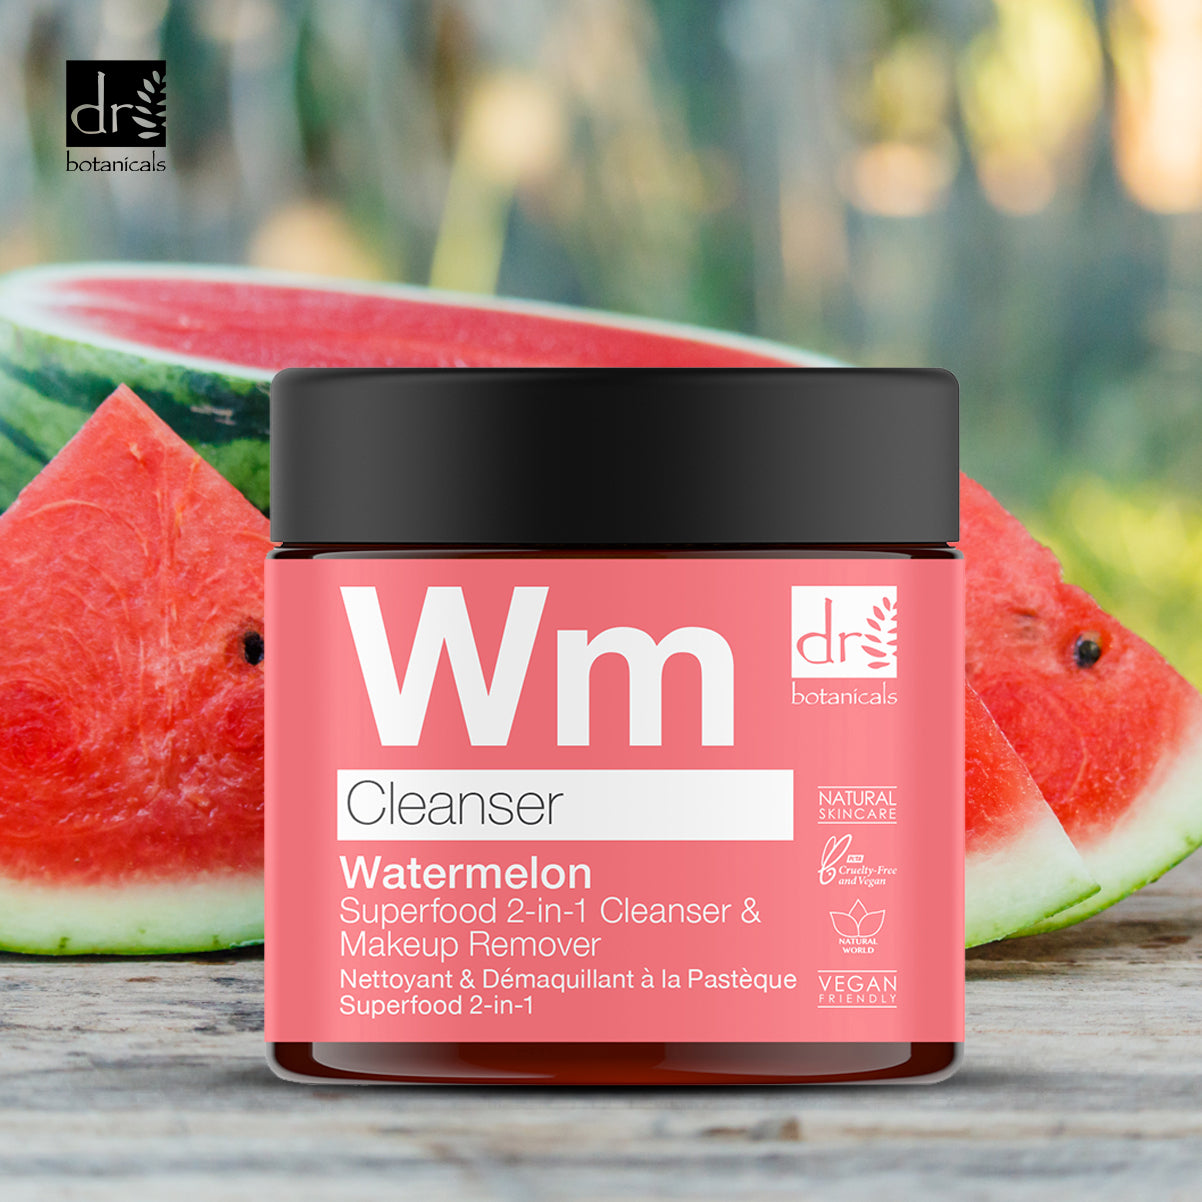 Watermelon Superfood 2-in-1 Cleanser & Makeup Remover